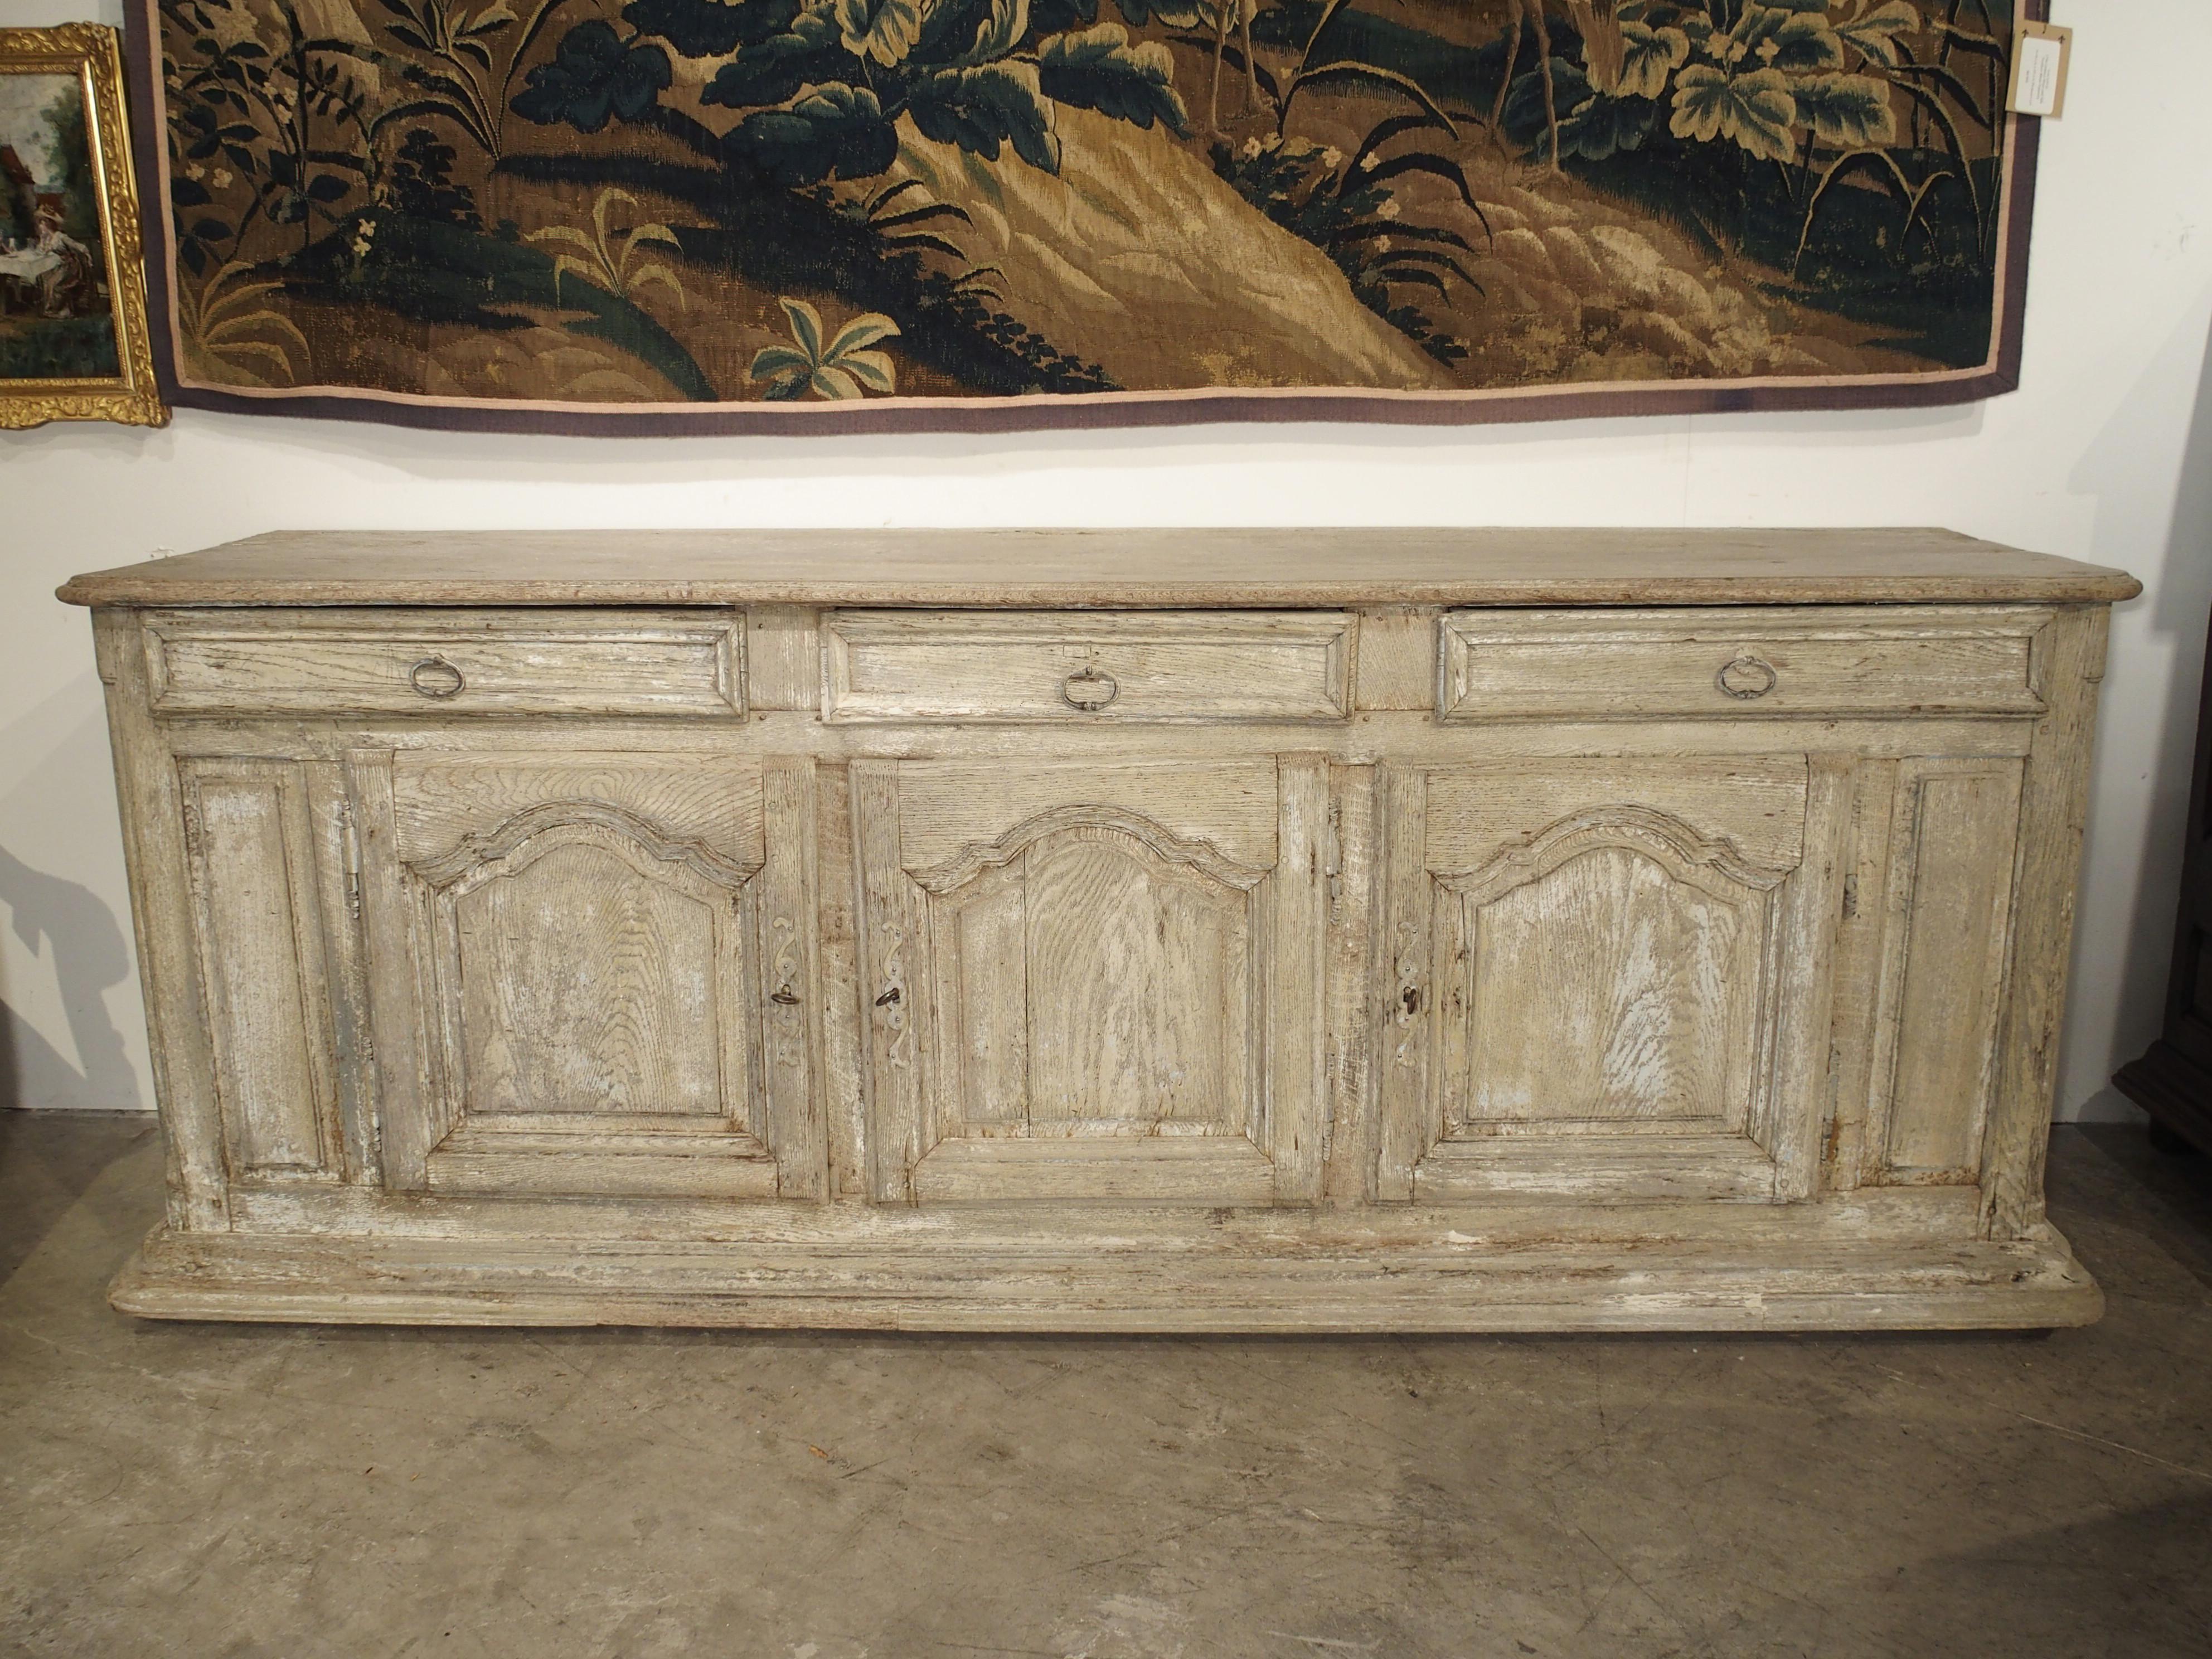 From Burgundy, France, this late 1600s whitewashed oak enfilade has three drawers with drop pulls, and three cabinet doors with indented and raised panels to either side. It has been whitewashed over a pale blue paint at some point in its history.